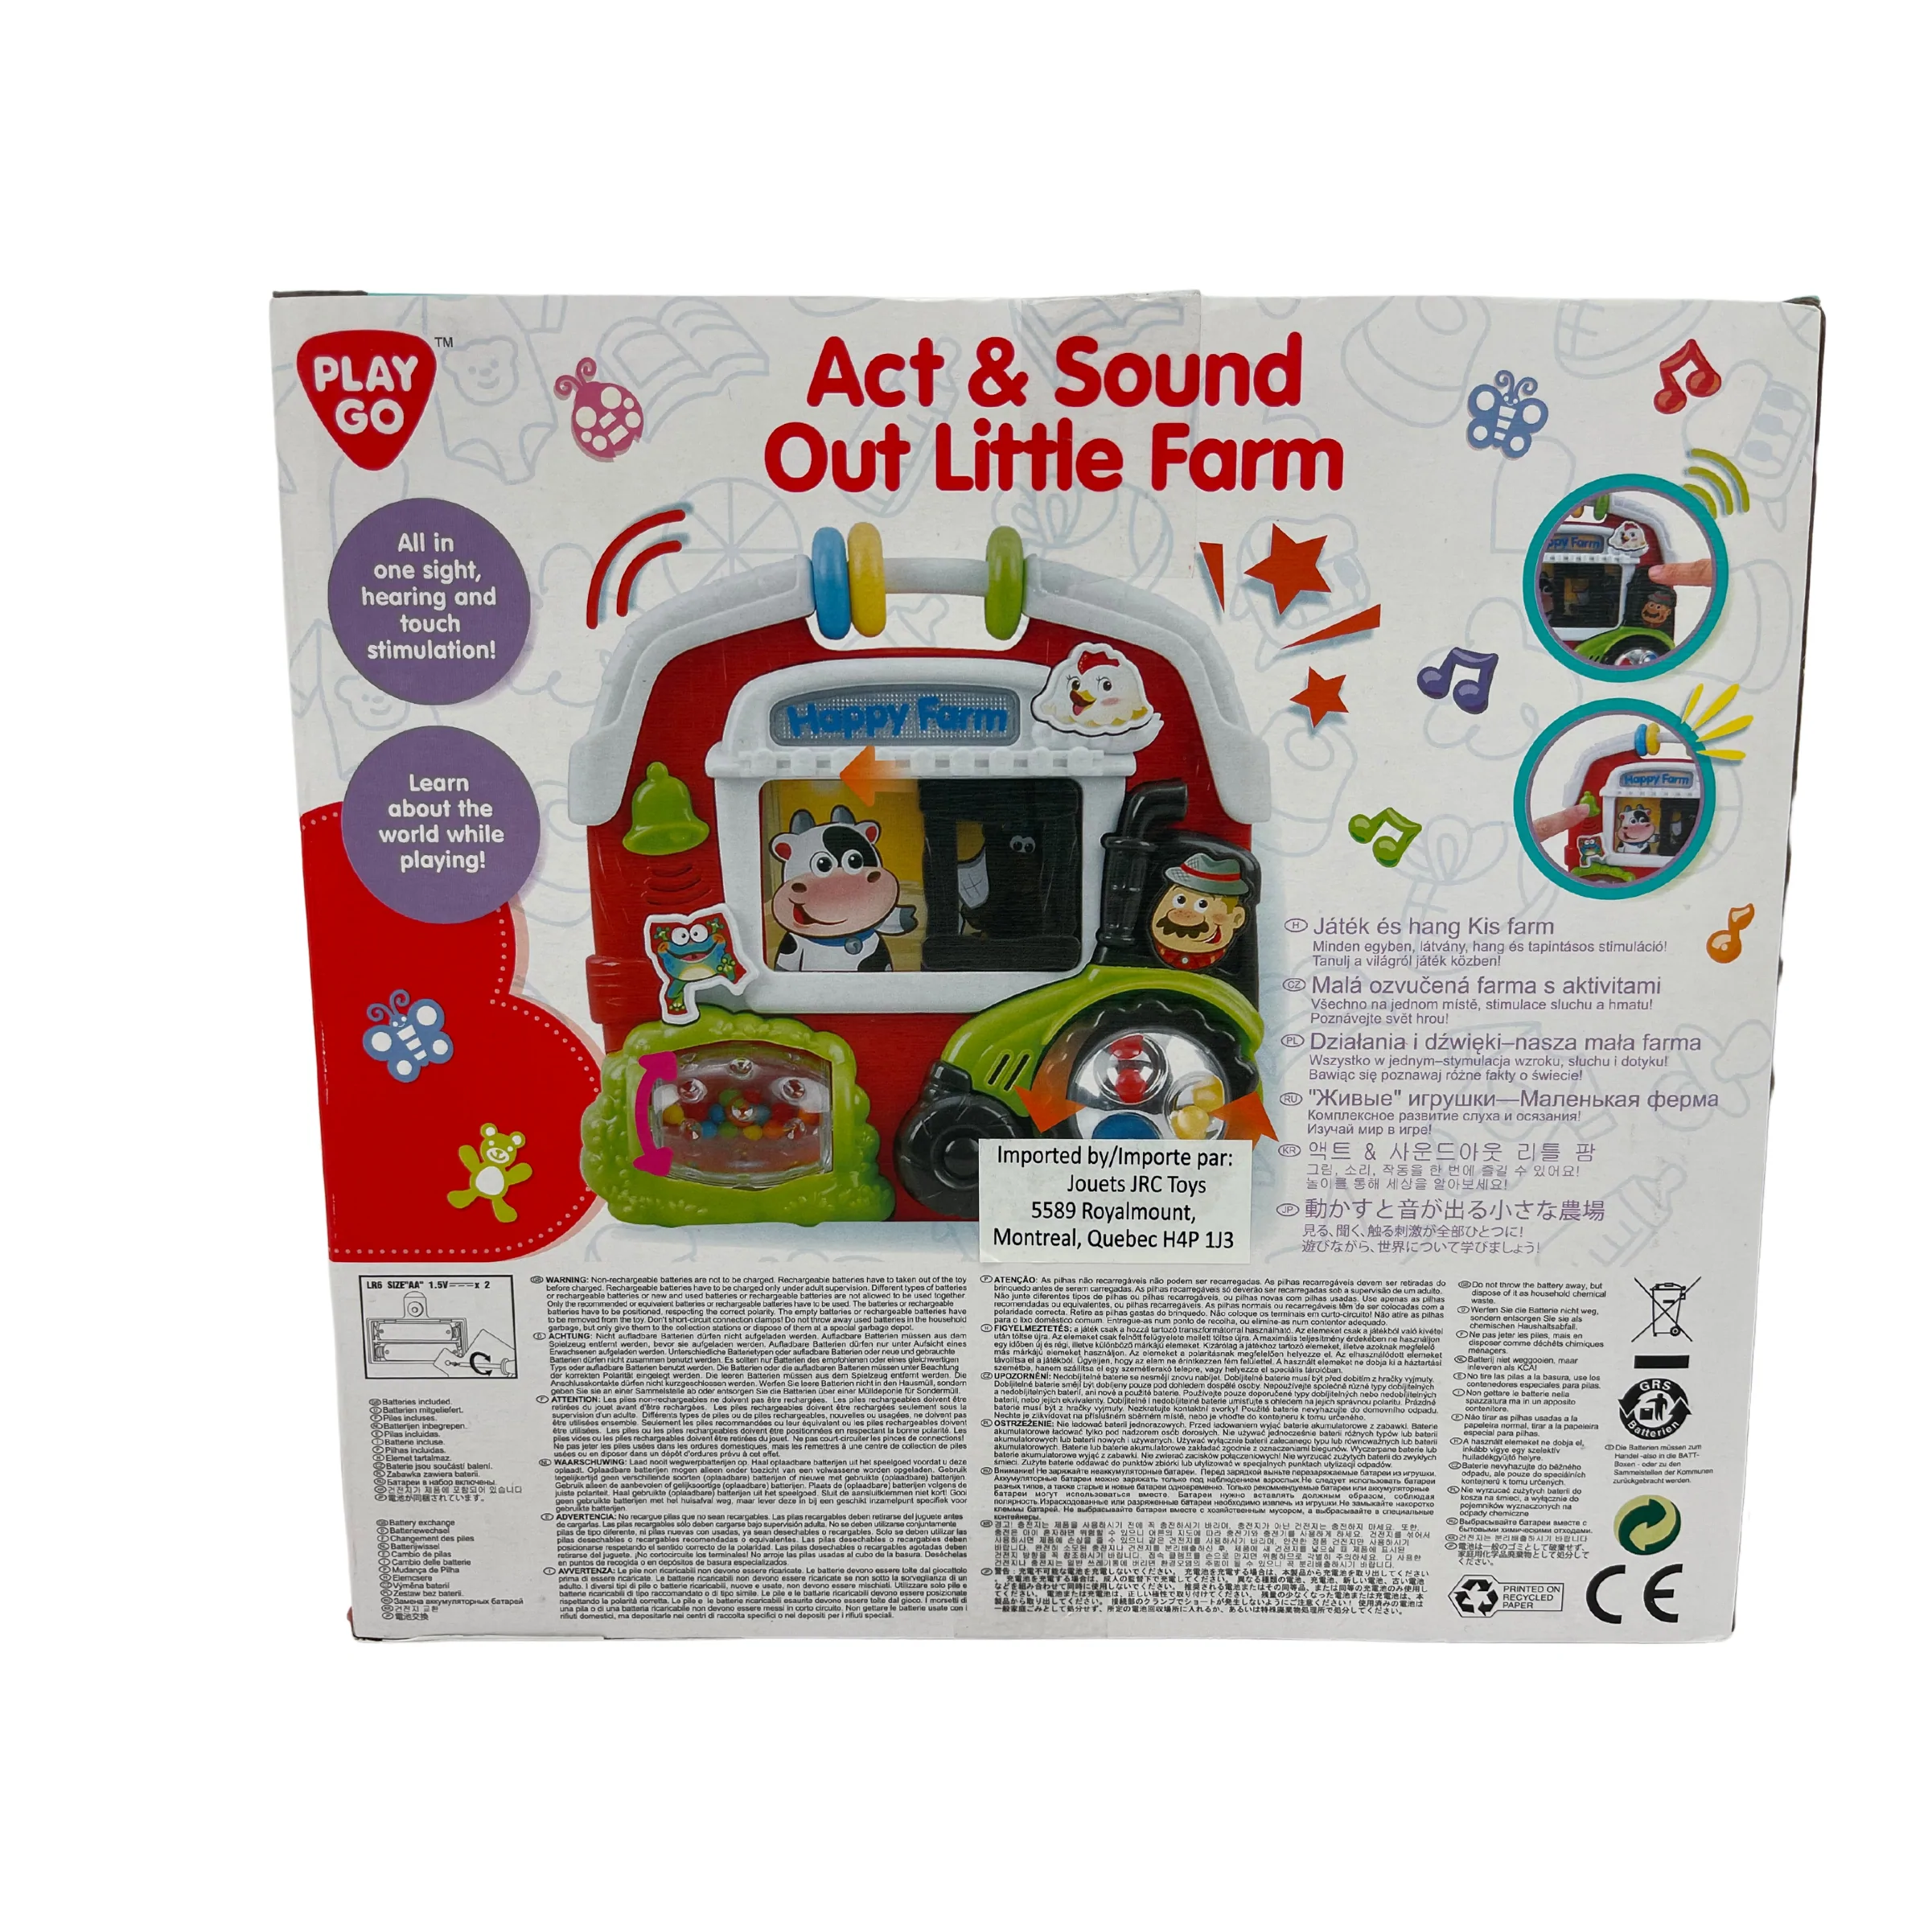 PlayGo Act & Sound Out Little Farm / Light and Sound / 6months+ **DEALS**